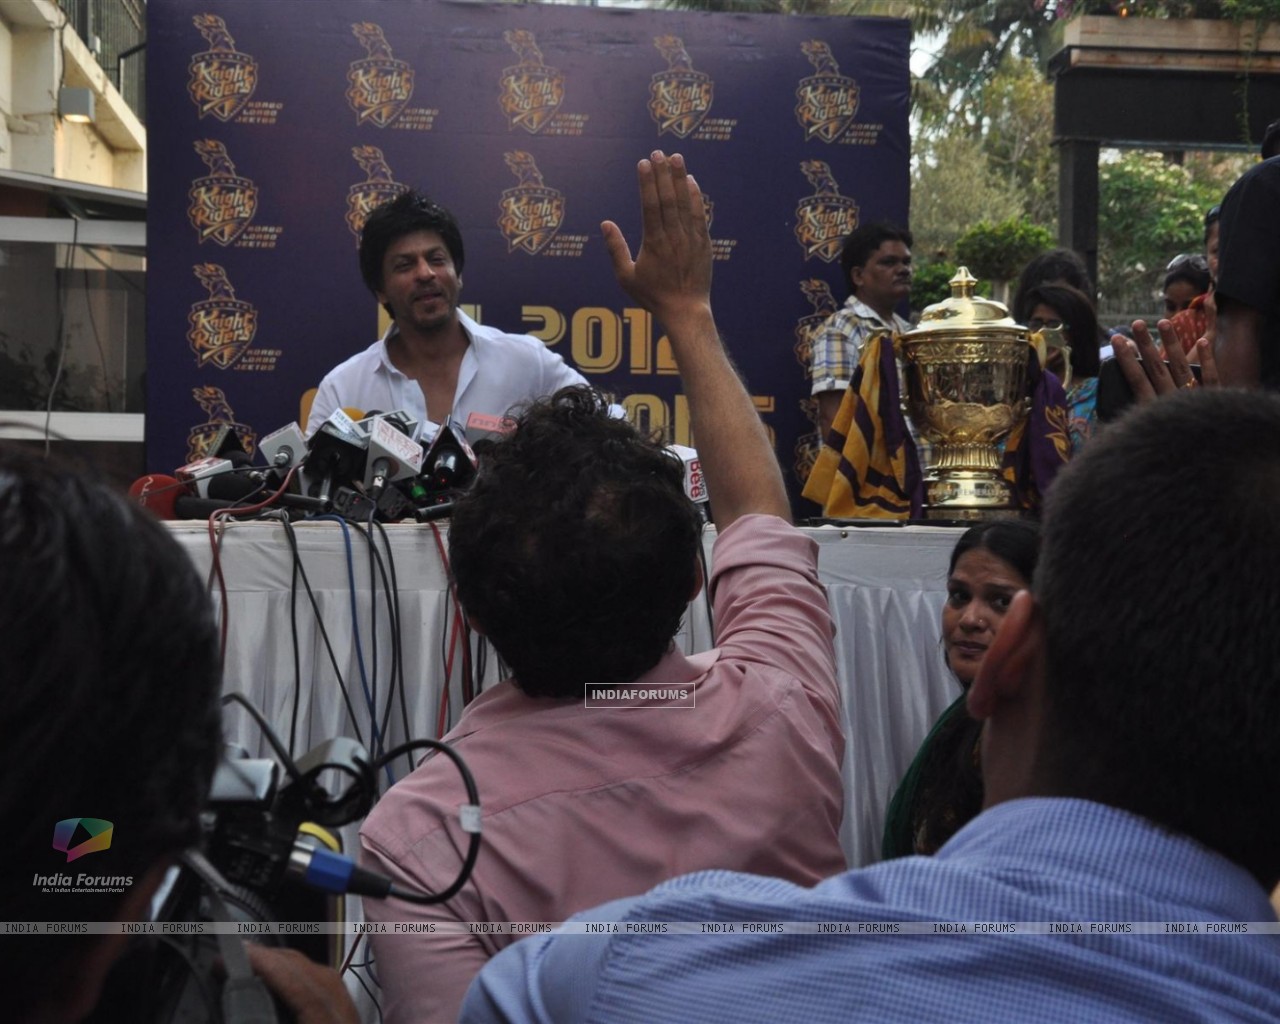 Shah Rukh Khan's Press Conference After Kkr's Victory - Crowd , HD Wallpaper & Backgrounds